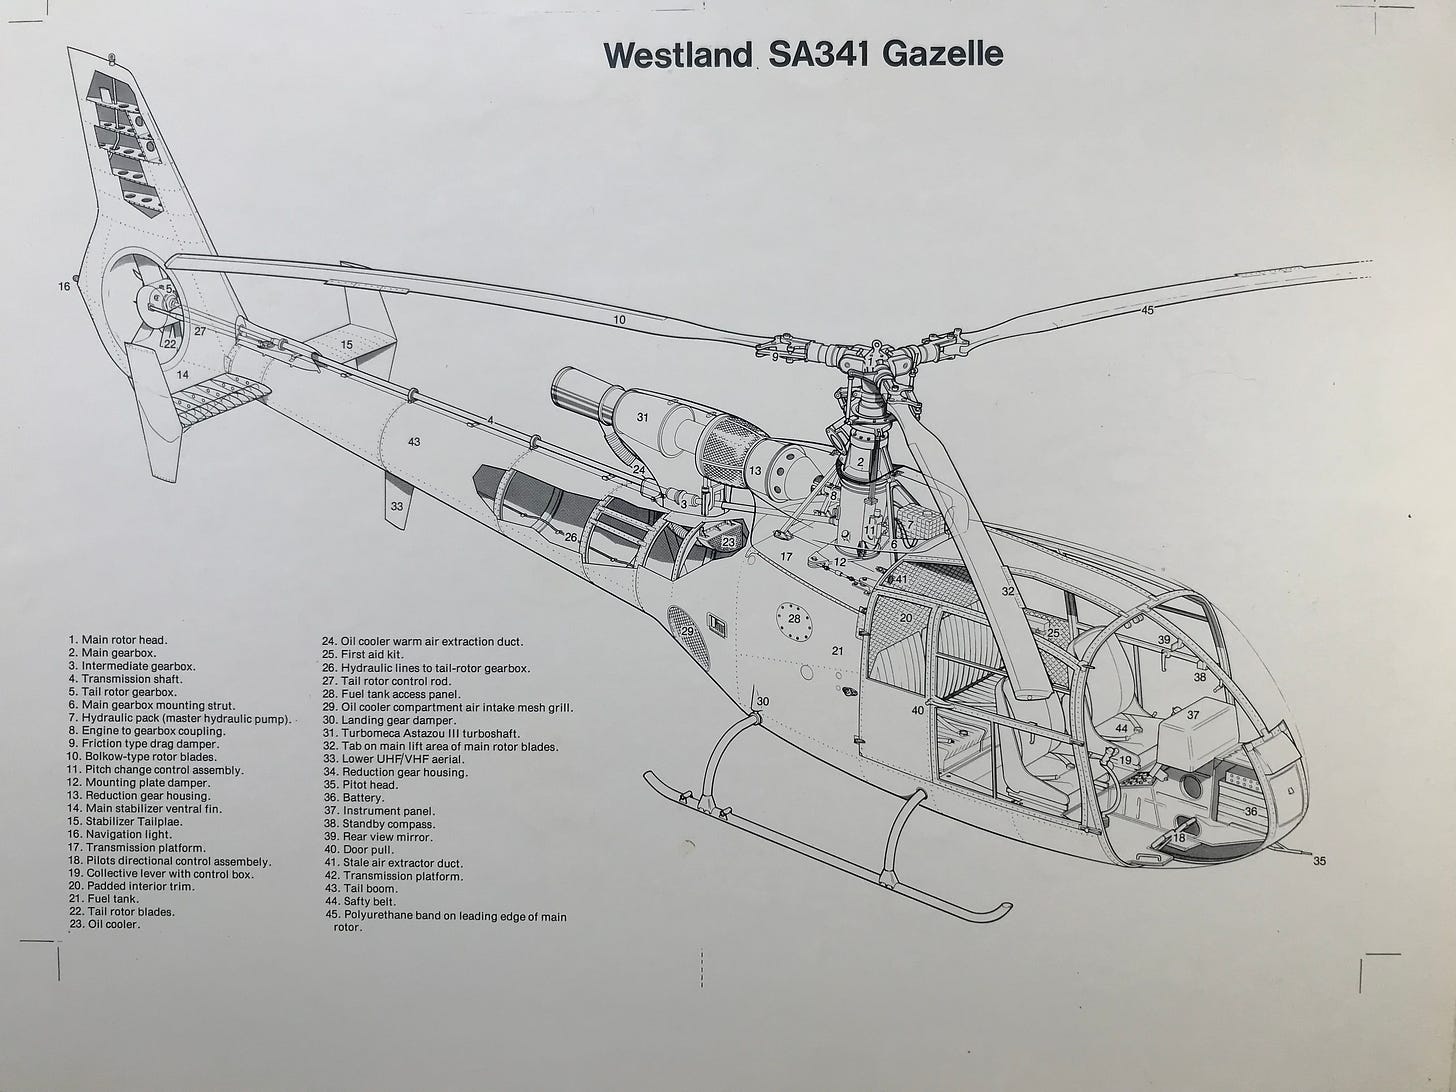 a technical illustration of a helicopter